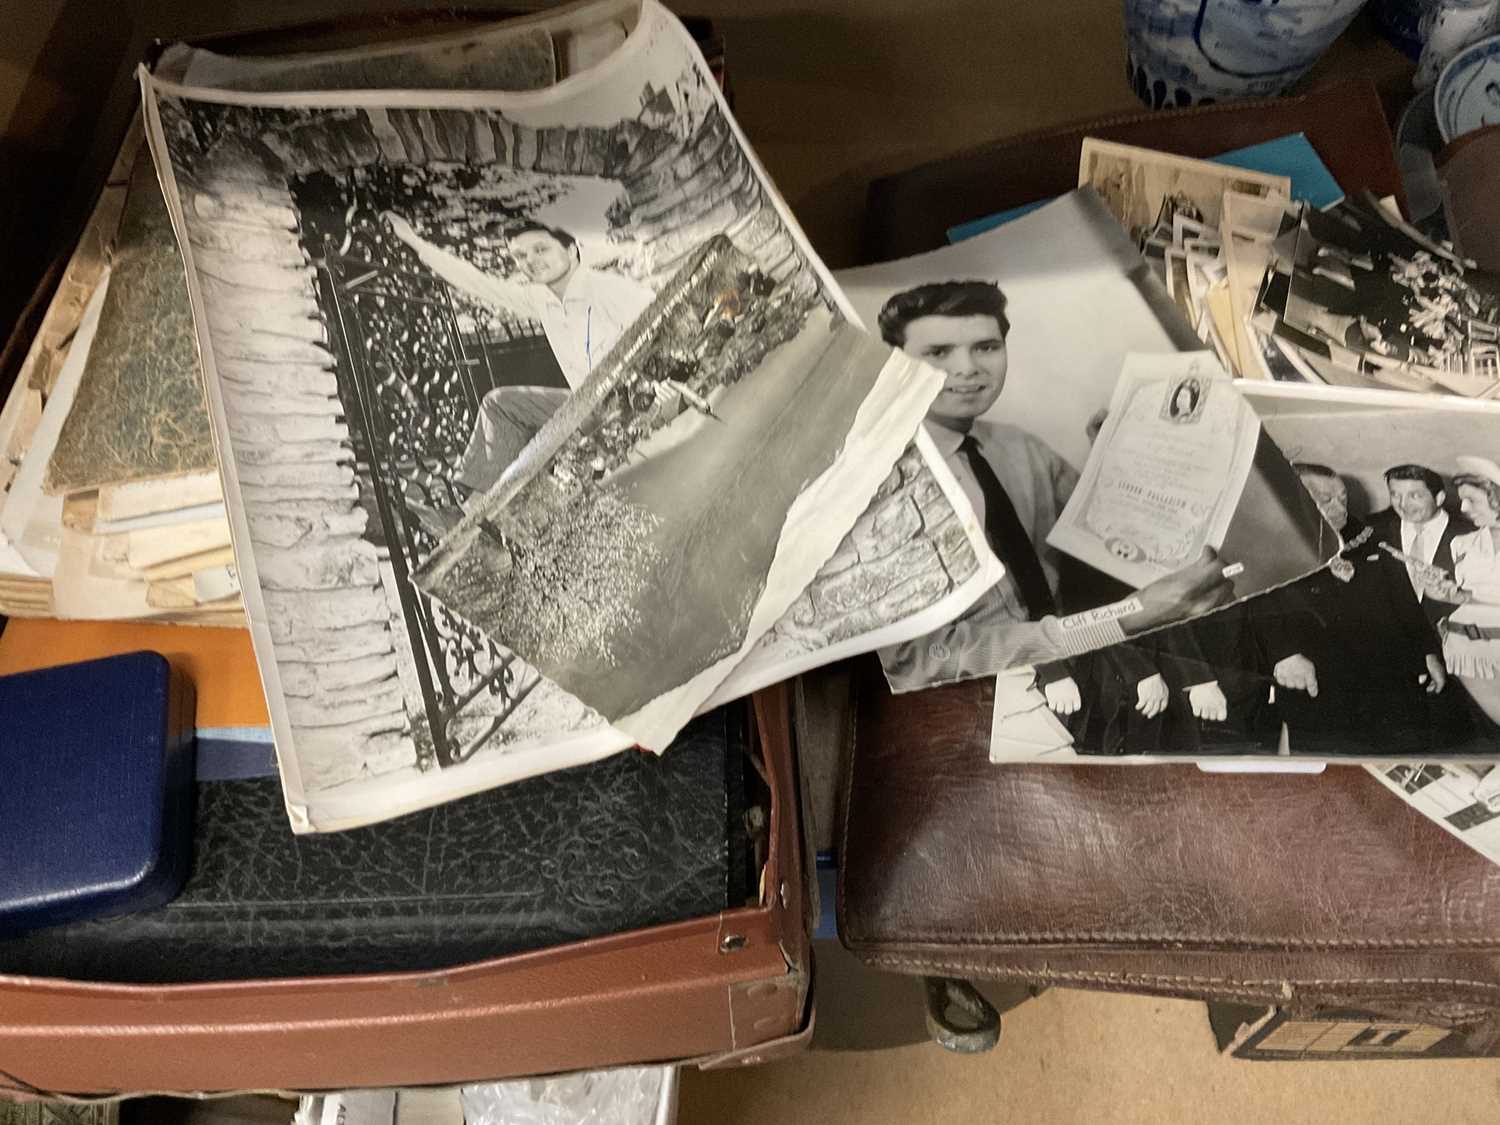 Lot 229 - Box of ephemera including signed celebrity photographs, early letters and hand written materials